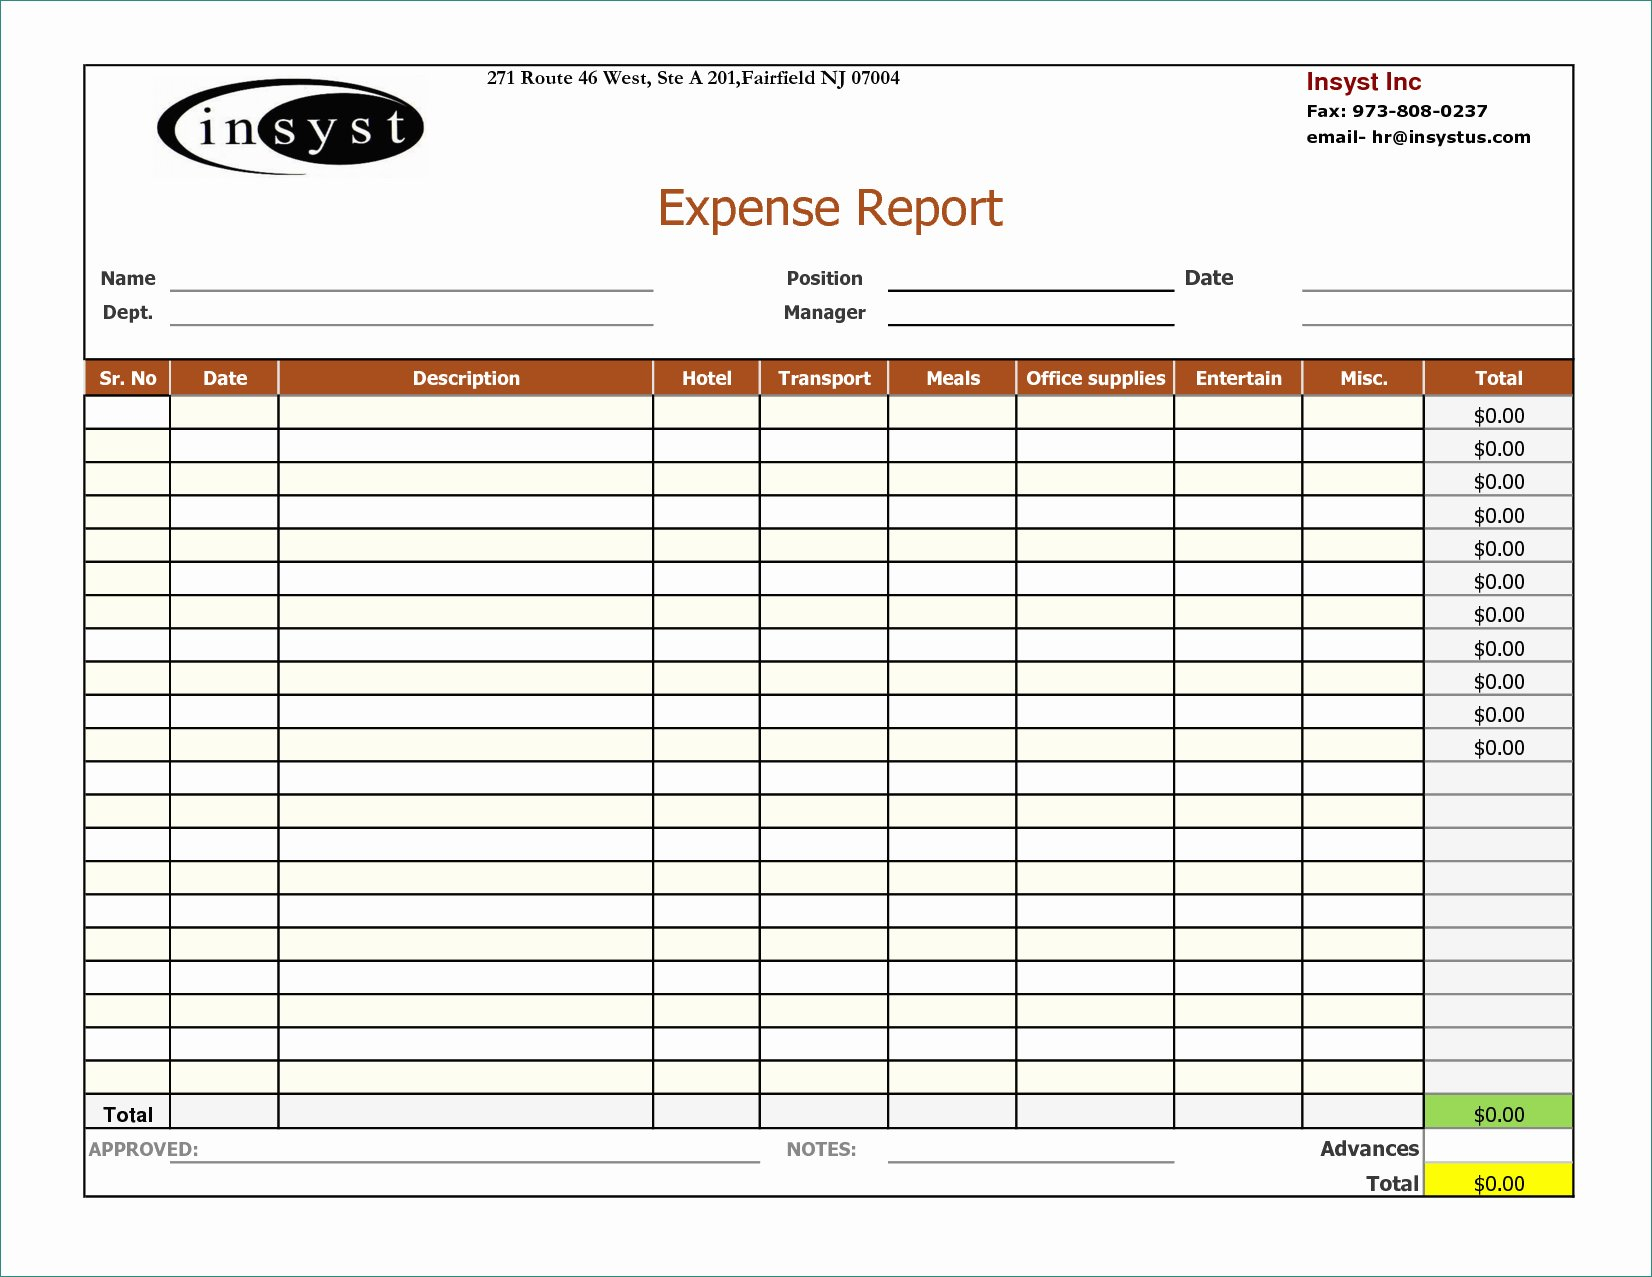 040 Expense Report Templates Excel Template Ideas Of Throughout Expense Report Template Excel 2010